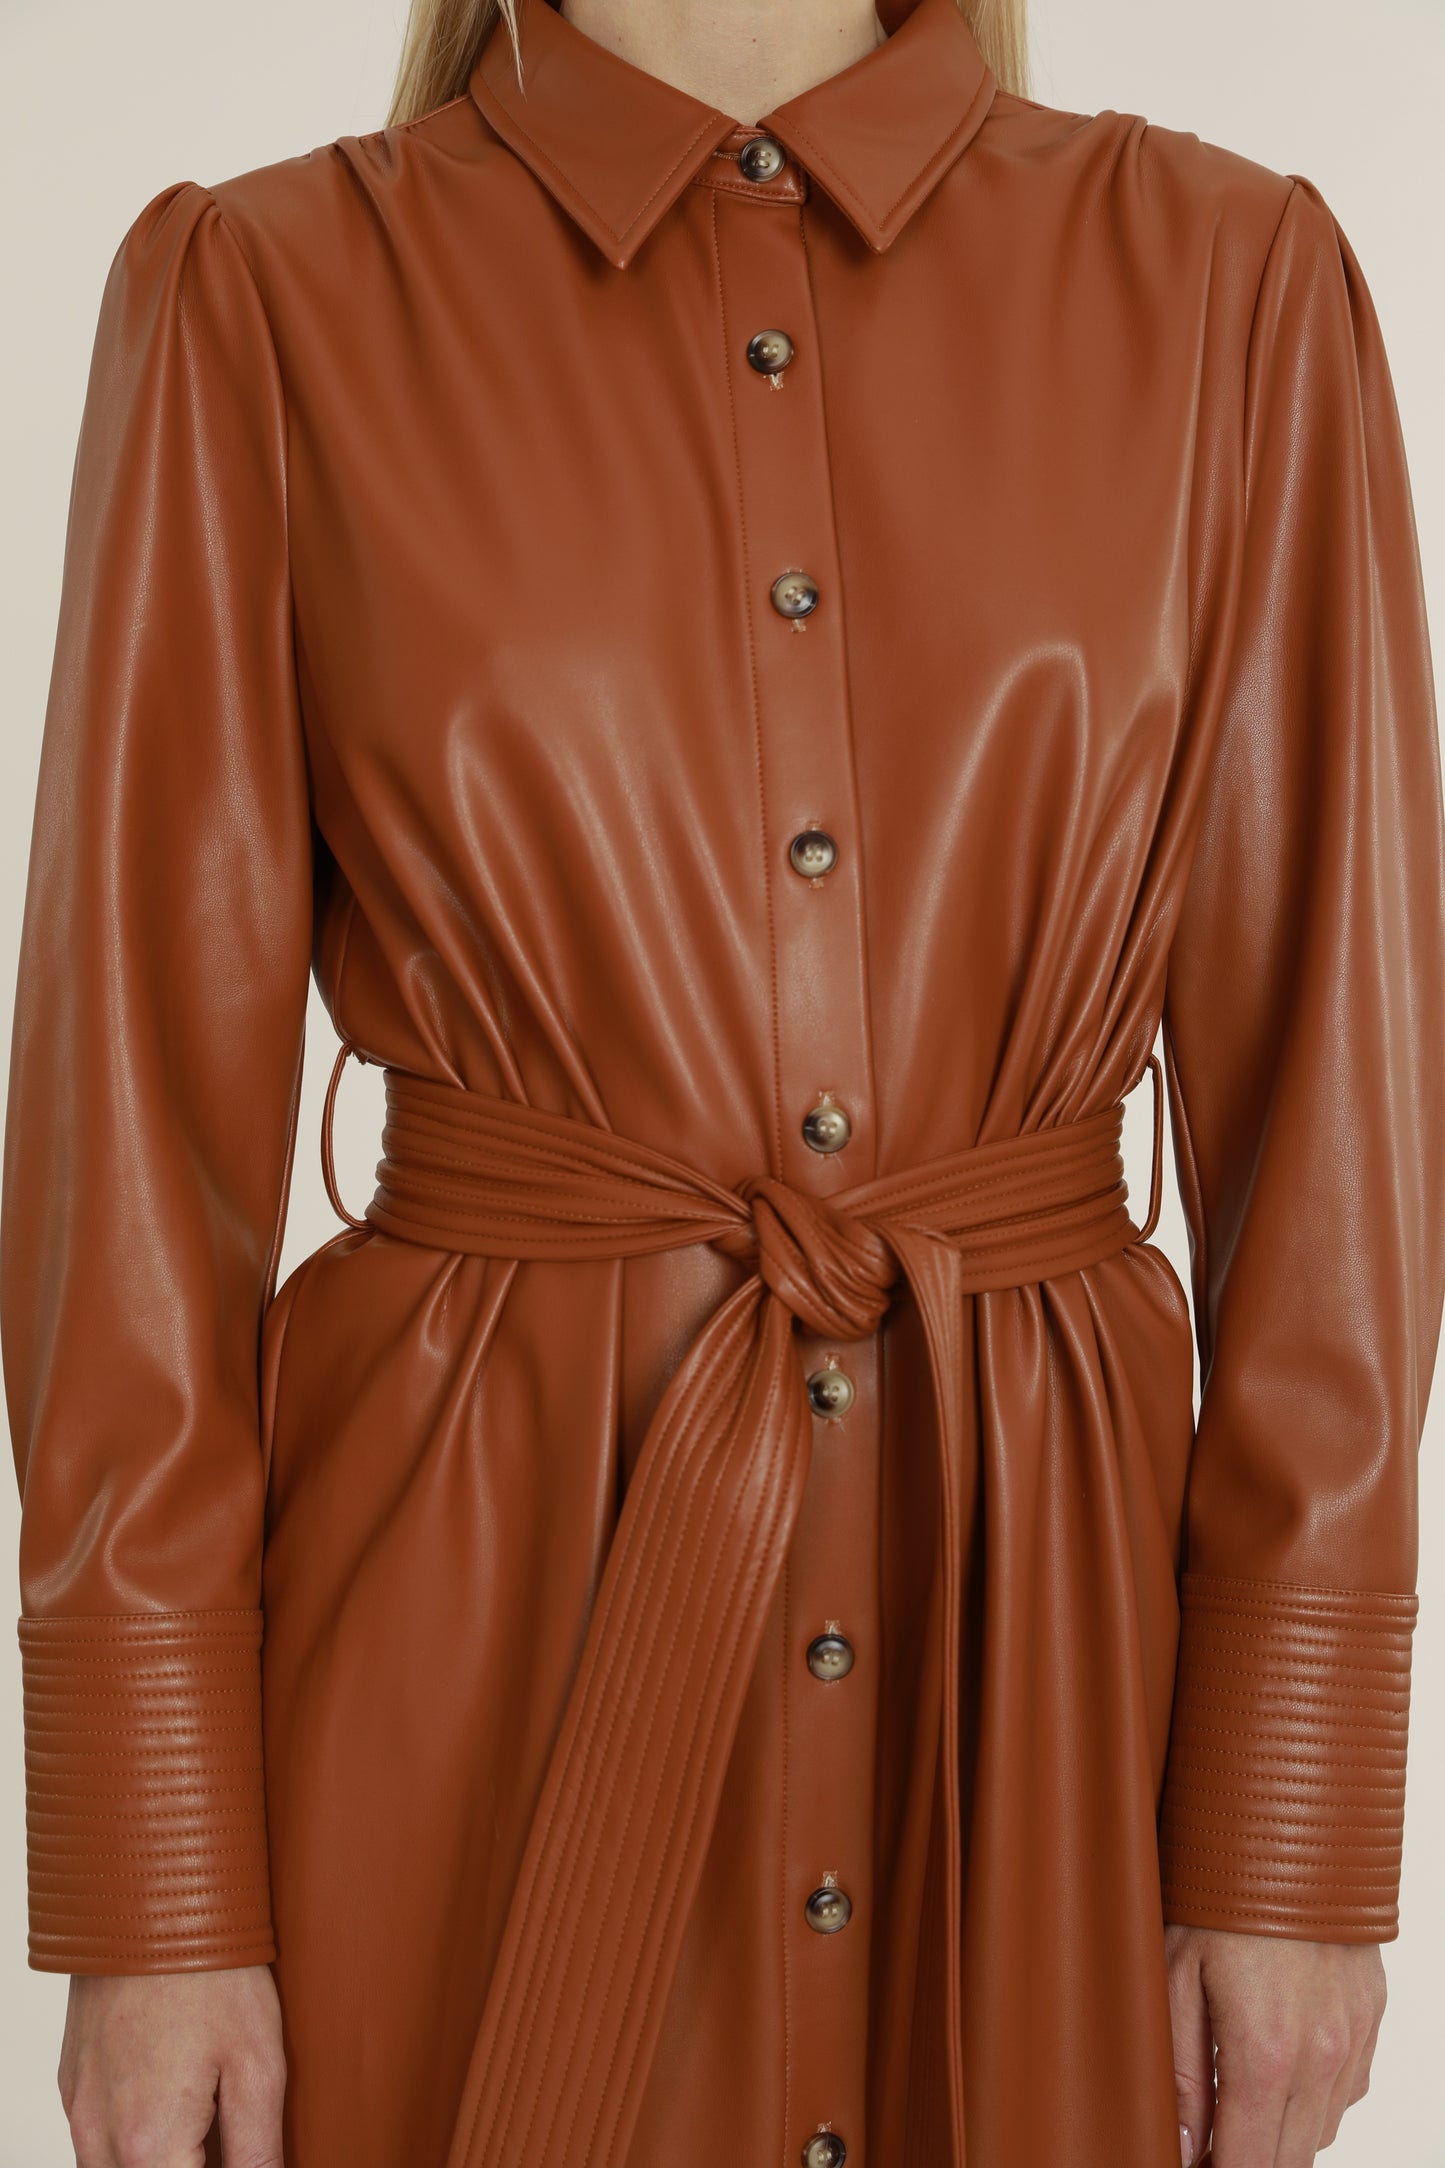 Vegan Leather Double Breasted Blazer Dress